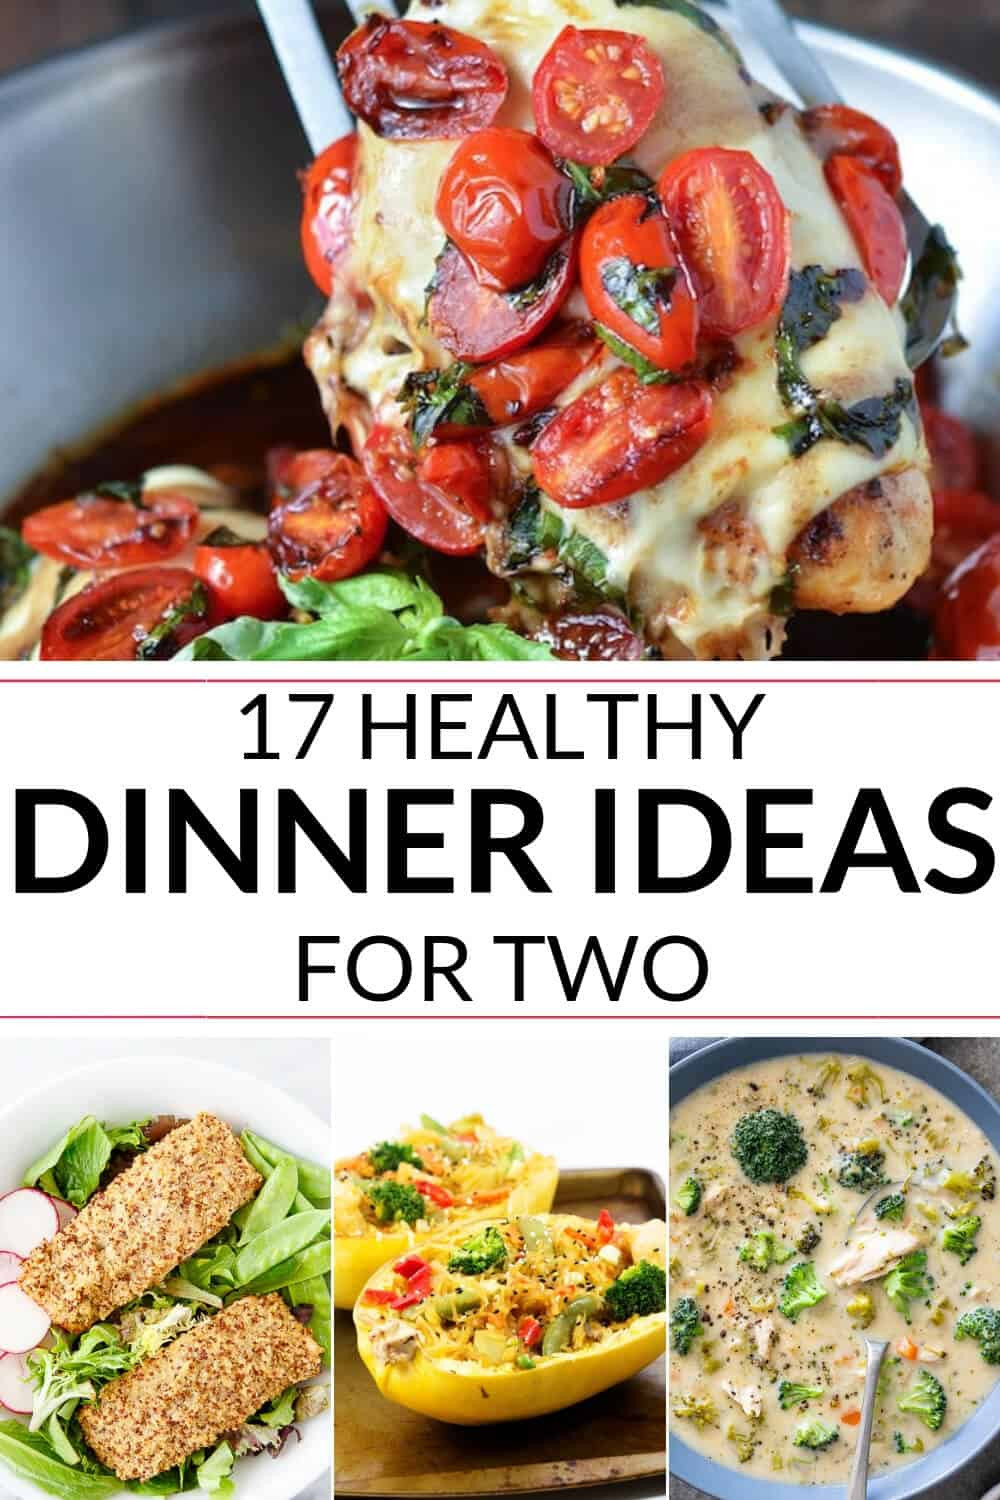 Dinner Ideas For 2
 Healthy Dinner Ideas for Two